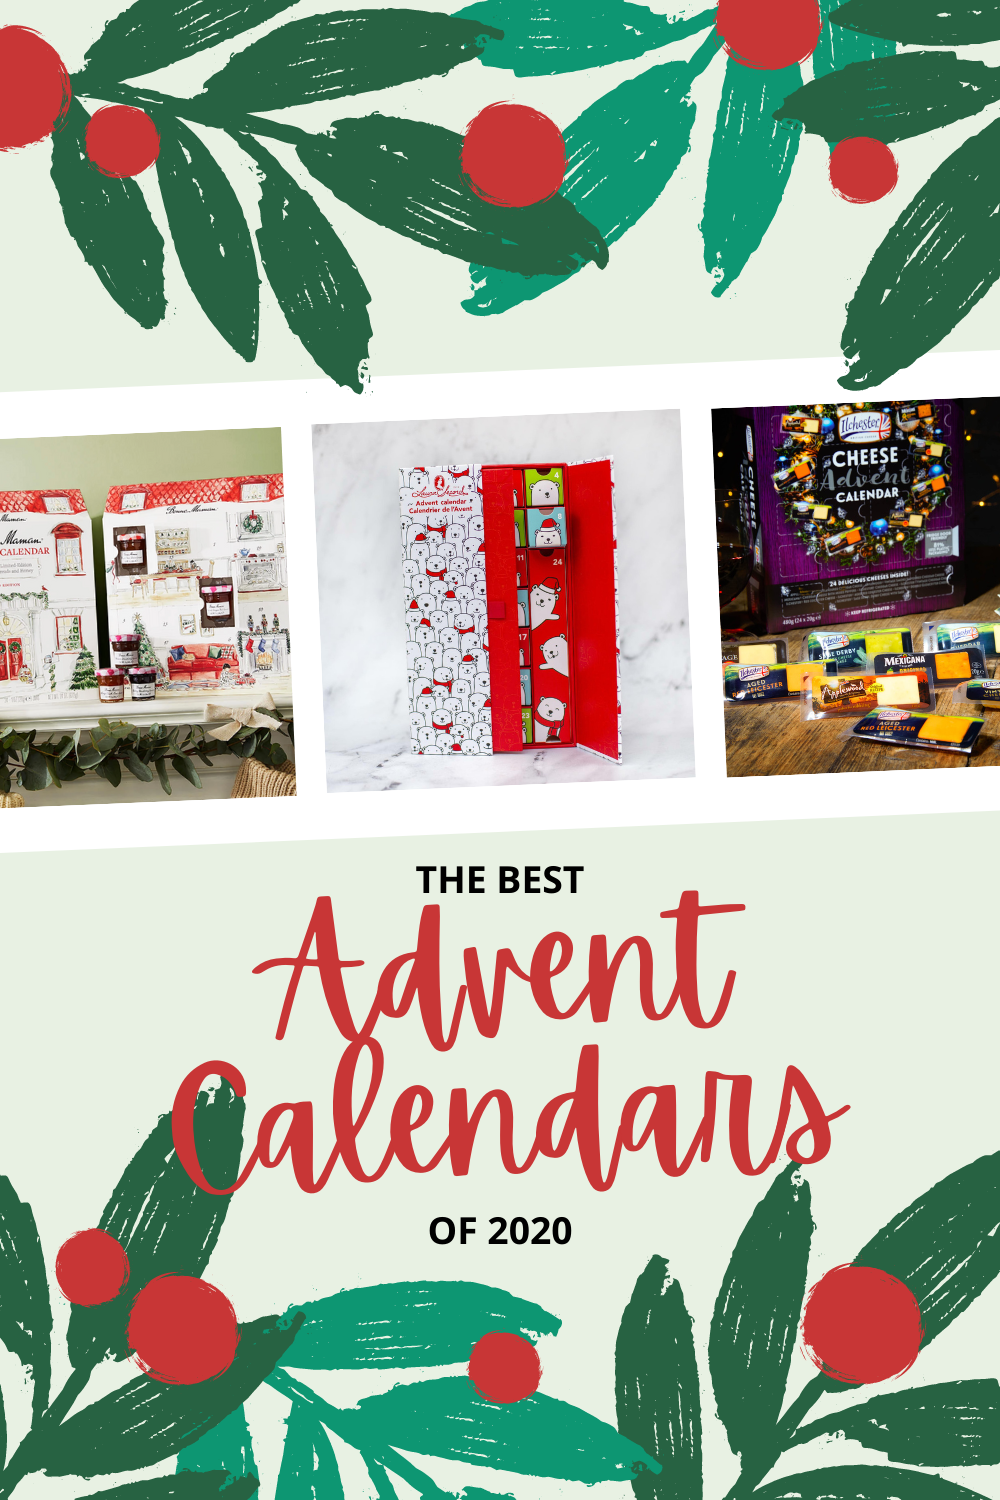 The best advent calendars of 2020